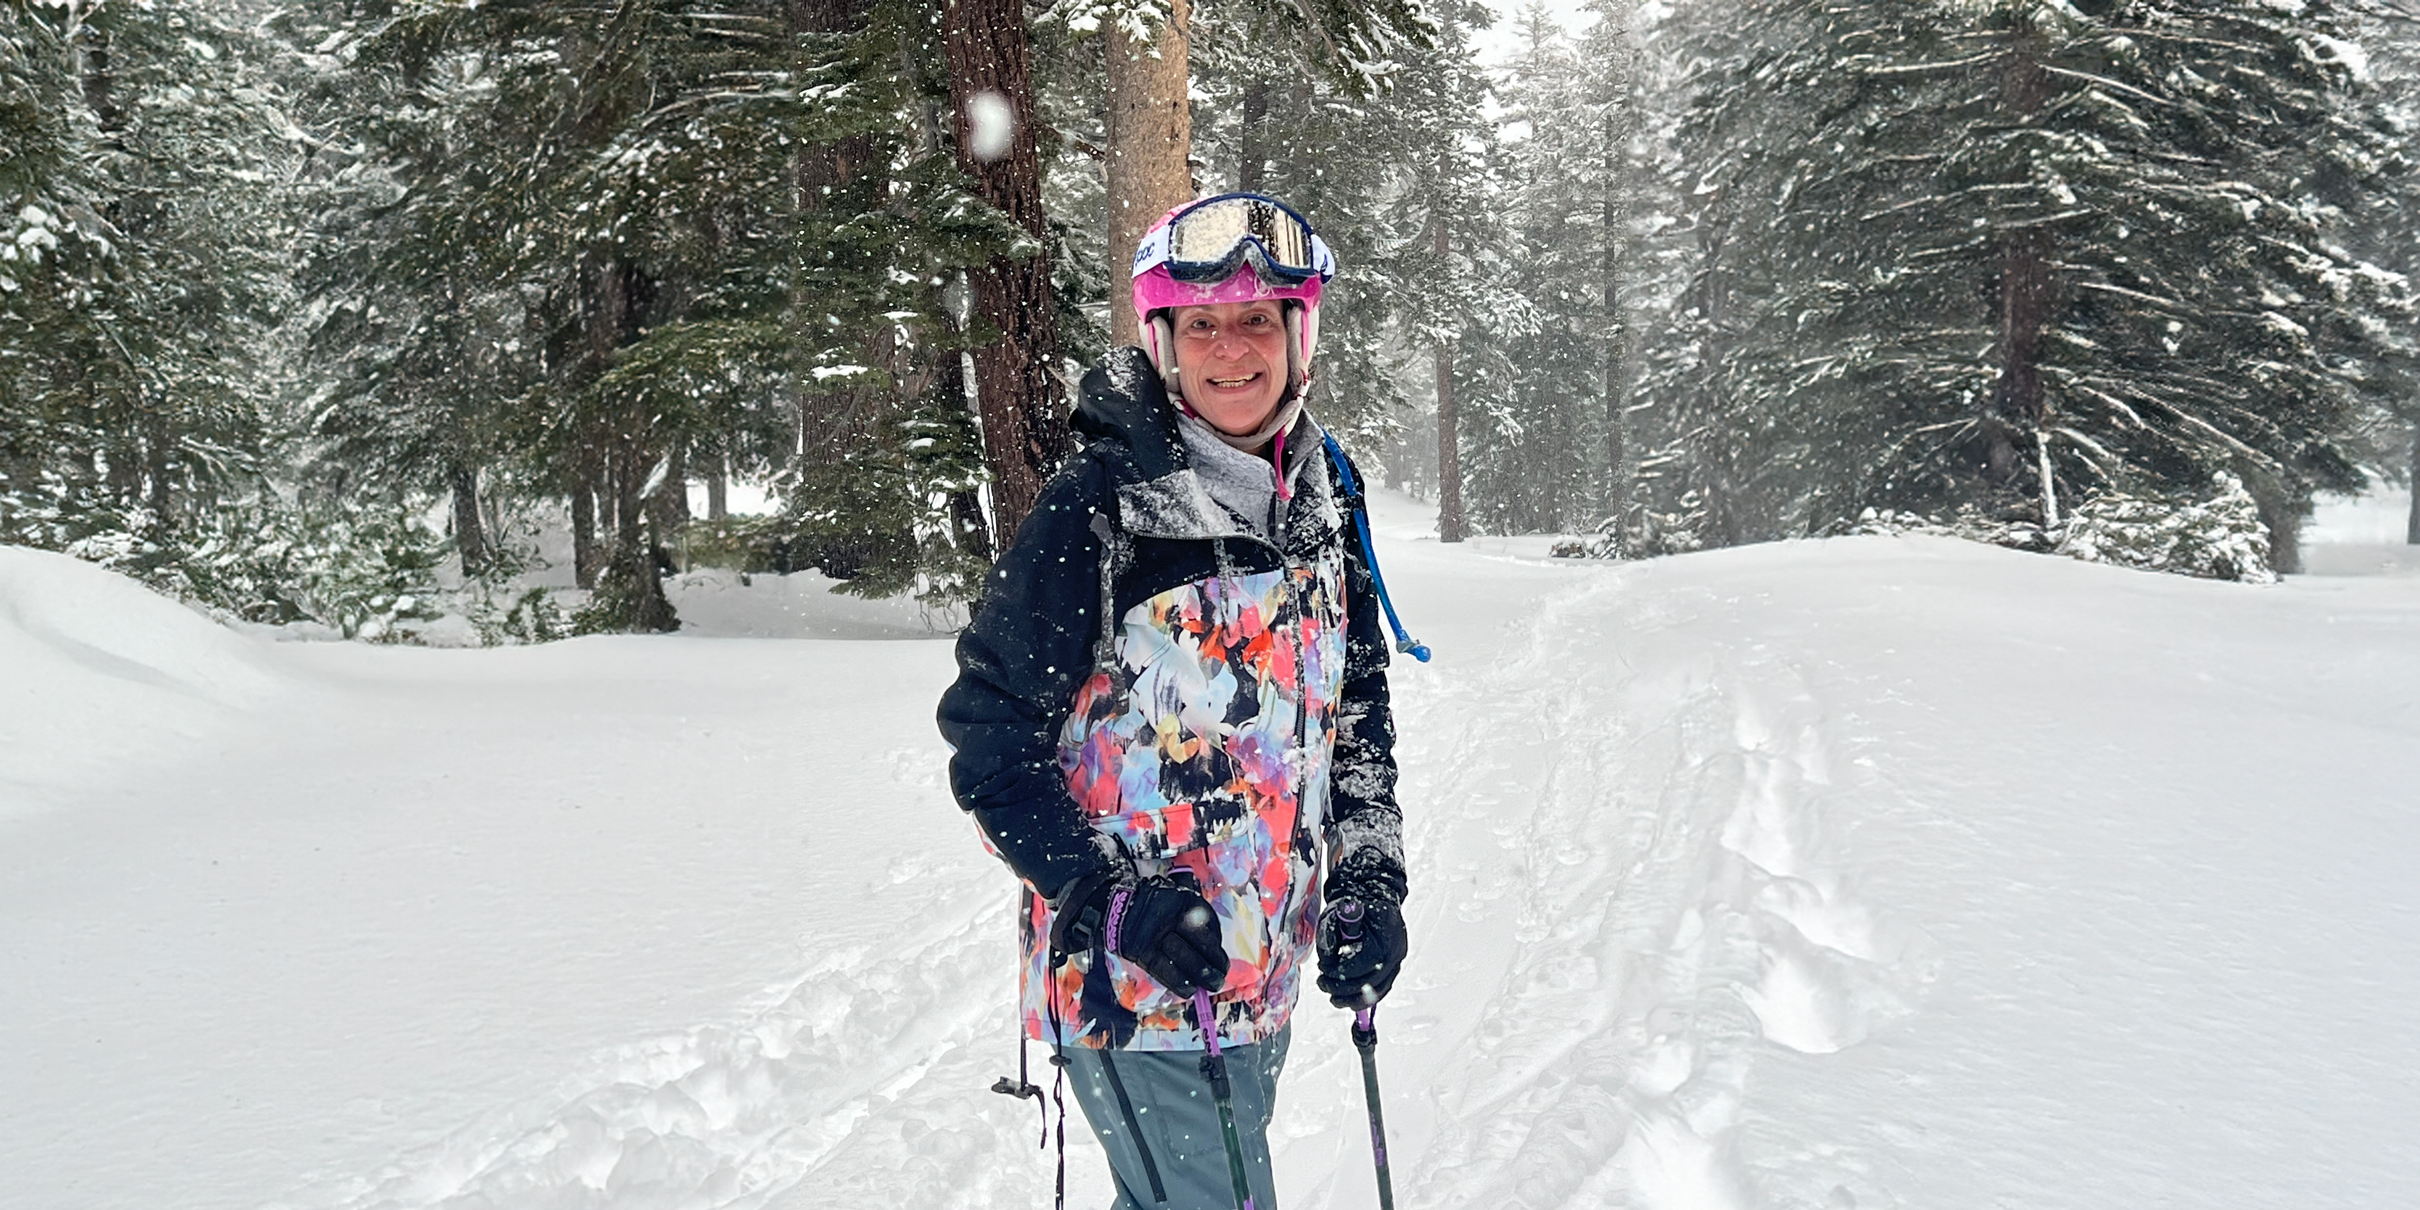 Beth Sirull wearing a helmet, winter jacket, and gloves, while holding onto ski poles. Behind Beth is a snow-covered forest.